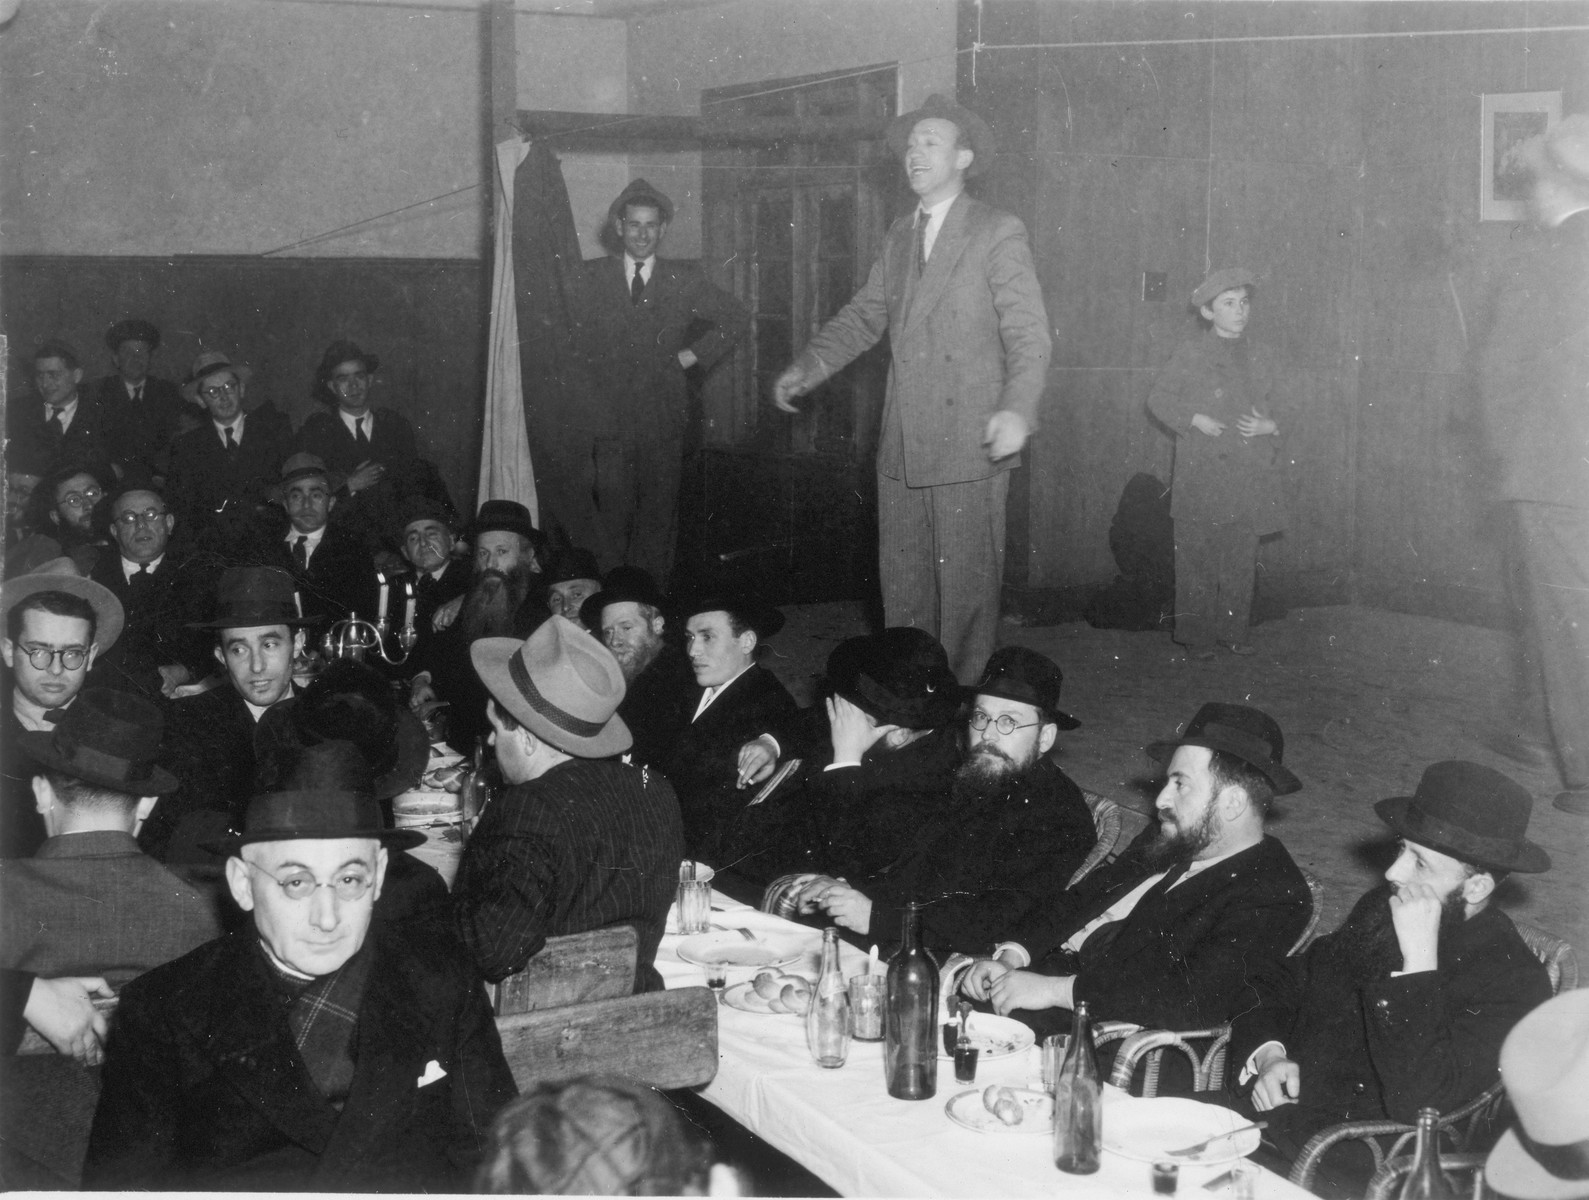 Yaakov Ederman entertains guests at a Jewish wedding in Shanghai.

Also pictured is Rabbi Shmuel Dovid Walkin, seated to the right of the candles, directly in front of the while curtain.